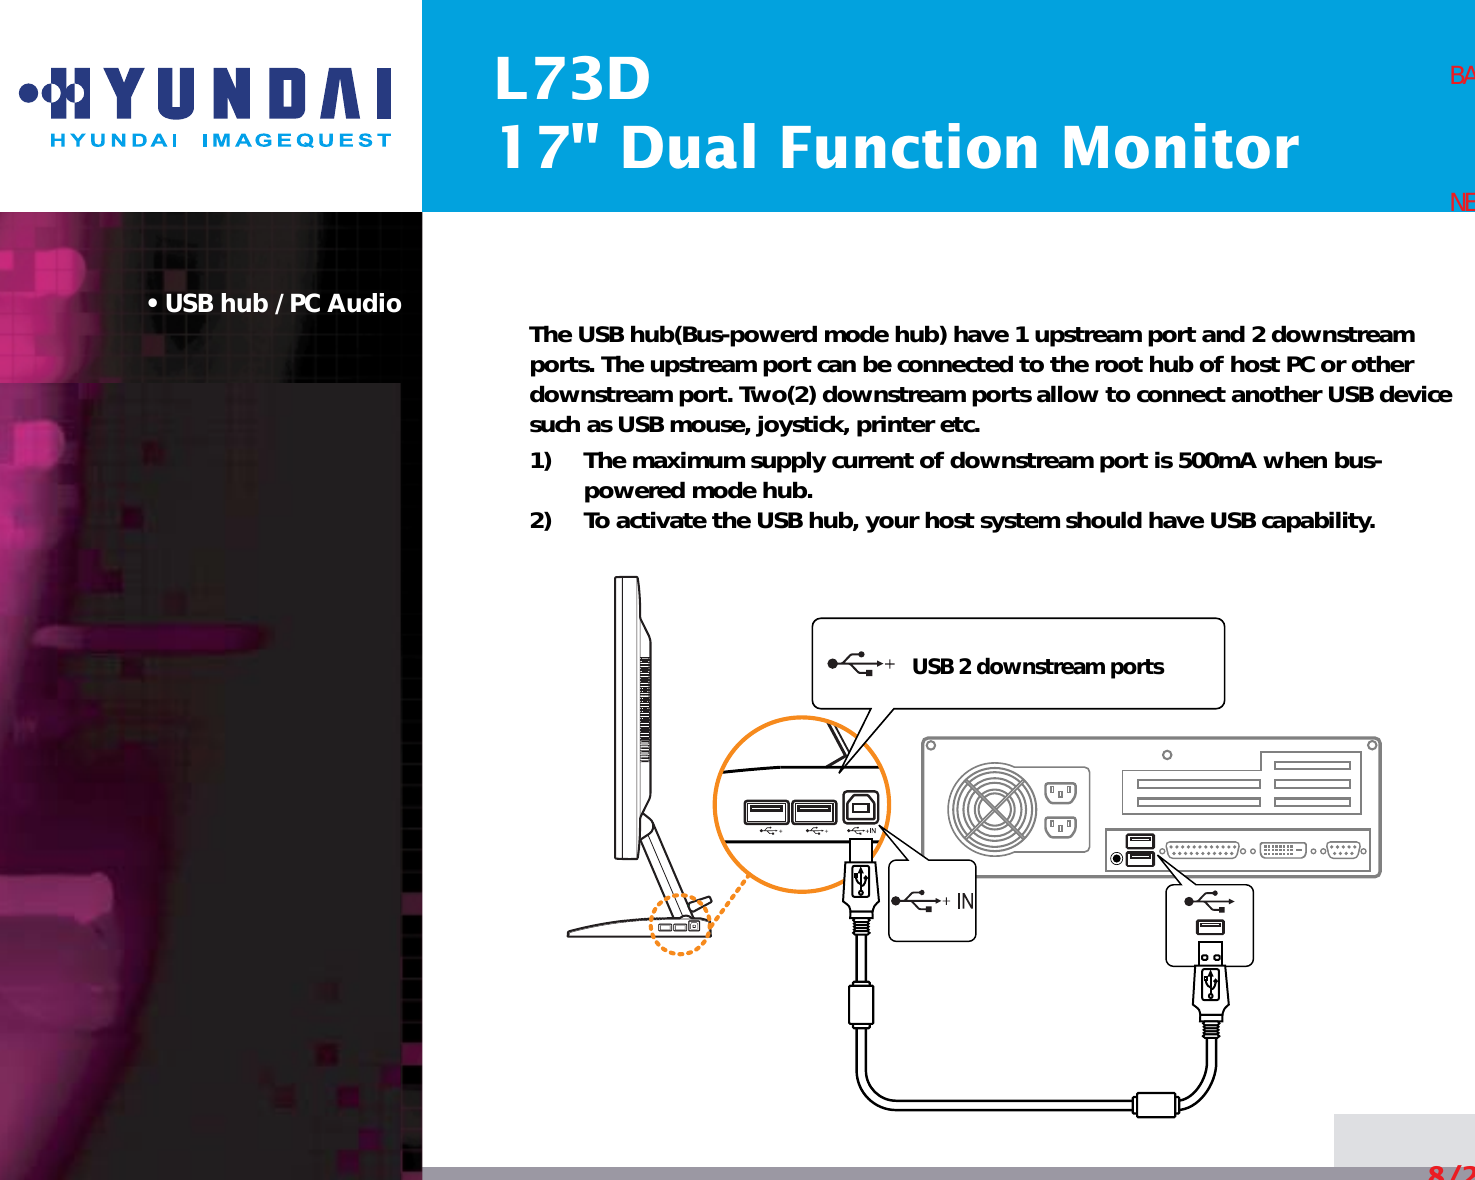 L73D17&quot; Dual Function Monitor• USB hub / PC Audio The USB hub(Bus-powerd mode hub) have 1 upstream port and 2 downstreamports. The upstream port can be connected to the root hub of host PC or otherdownstream port. Two(2) downstream ports allow to connect another USB devicesuch as USB mouse, joystick, printer etc.1)     The maximum supply current of downstream port is 500mA when bus-powered mode hub.2)     To activate the USB hub, your host system should have USB capability.8/24BACKNEXTUSB 2 downstream ports